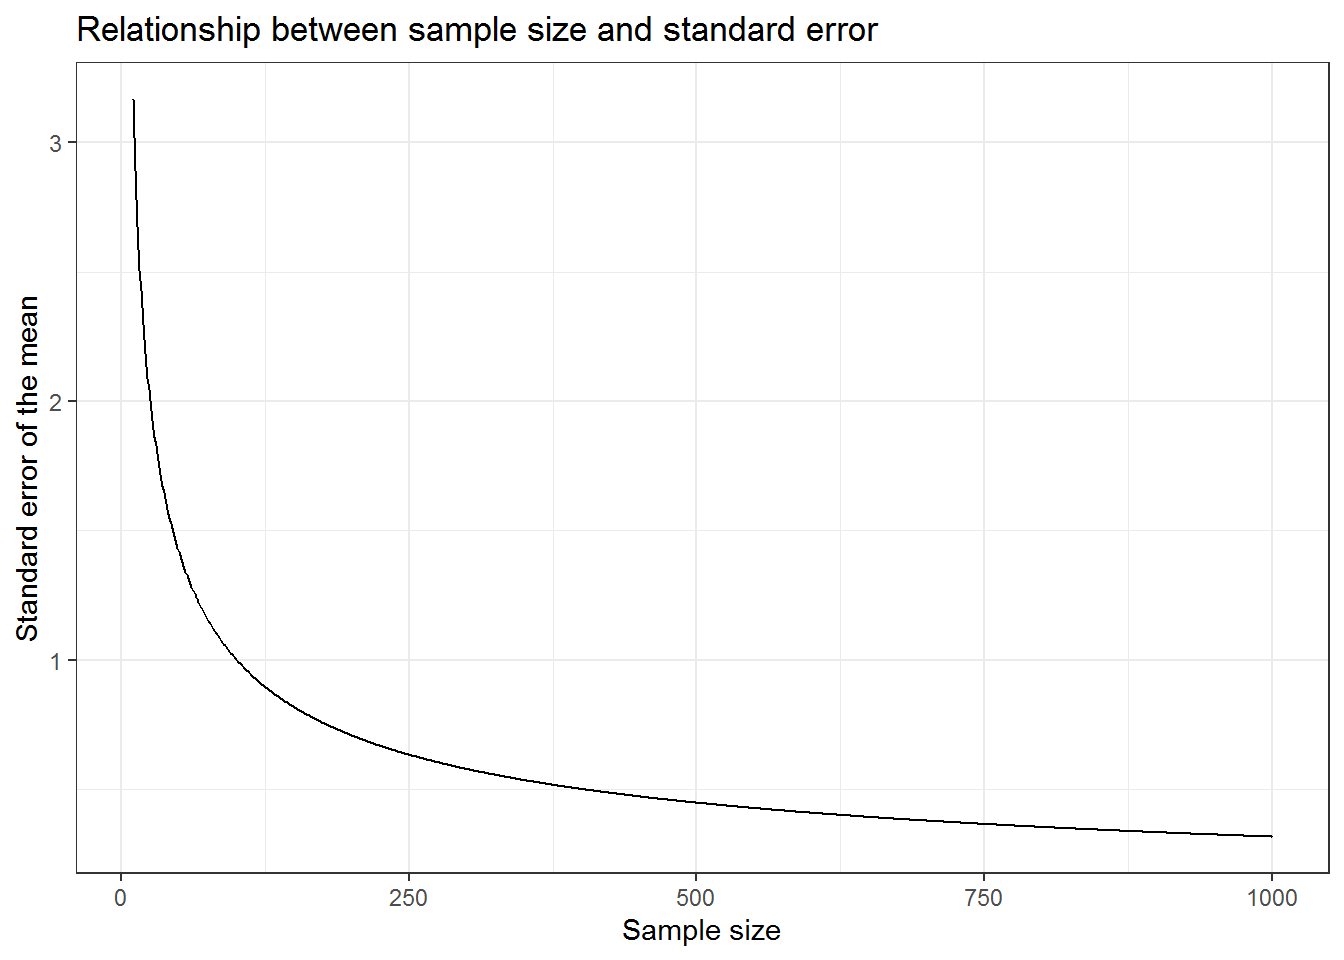 Relationship between the sample size and the standard error